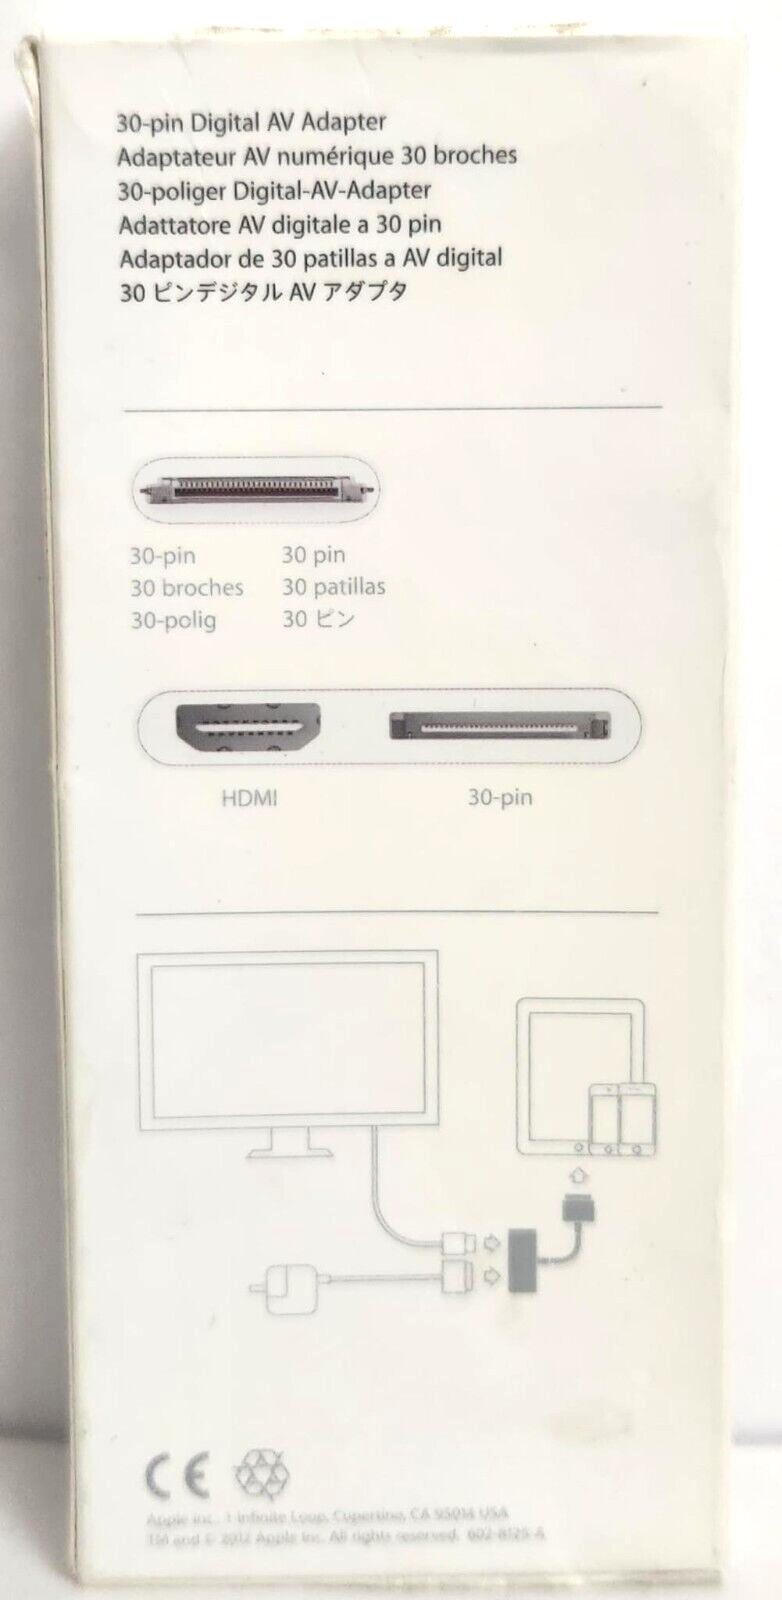 Apple - Digital A/V Adapter - White 30pin EXCELLENT GENUINE MD098ZM/A - $11.64